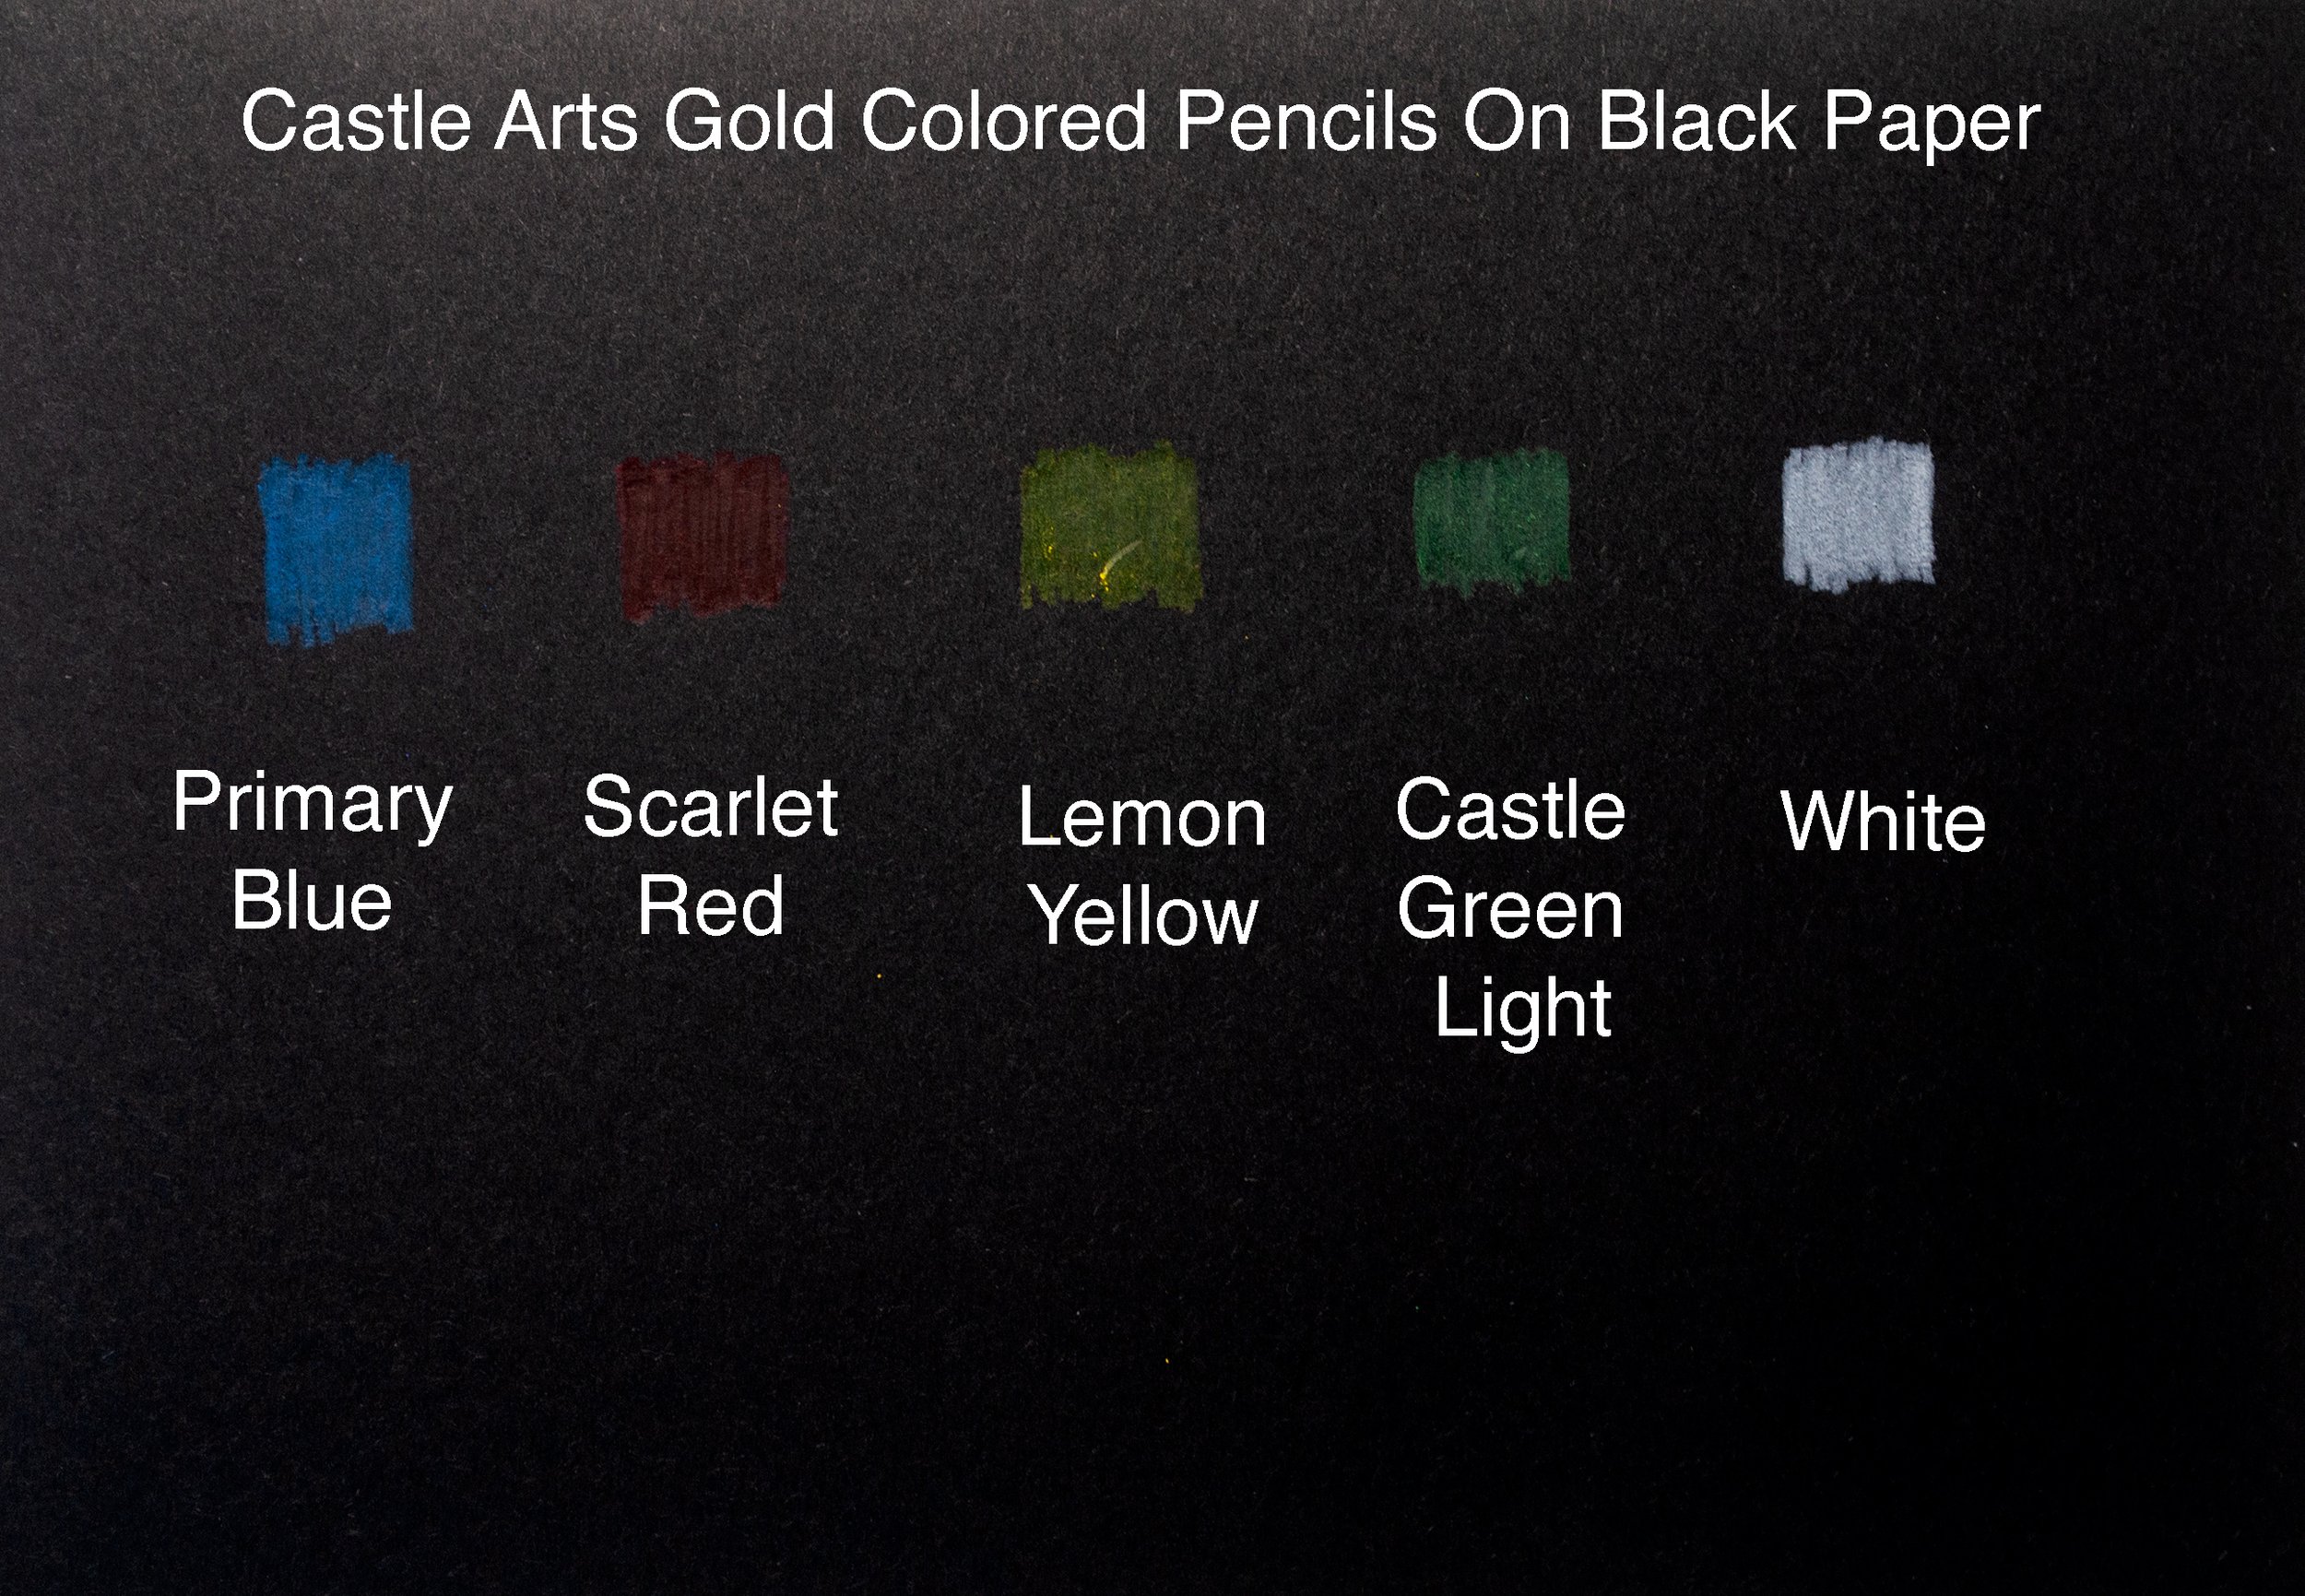  Castle Art Supplies Gold Standard 120 Coloring Pencils Set, Quality Oil-based Colored Cores Stay Sharper, Tougher Against Breakage, For Adult Artists, Colorists